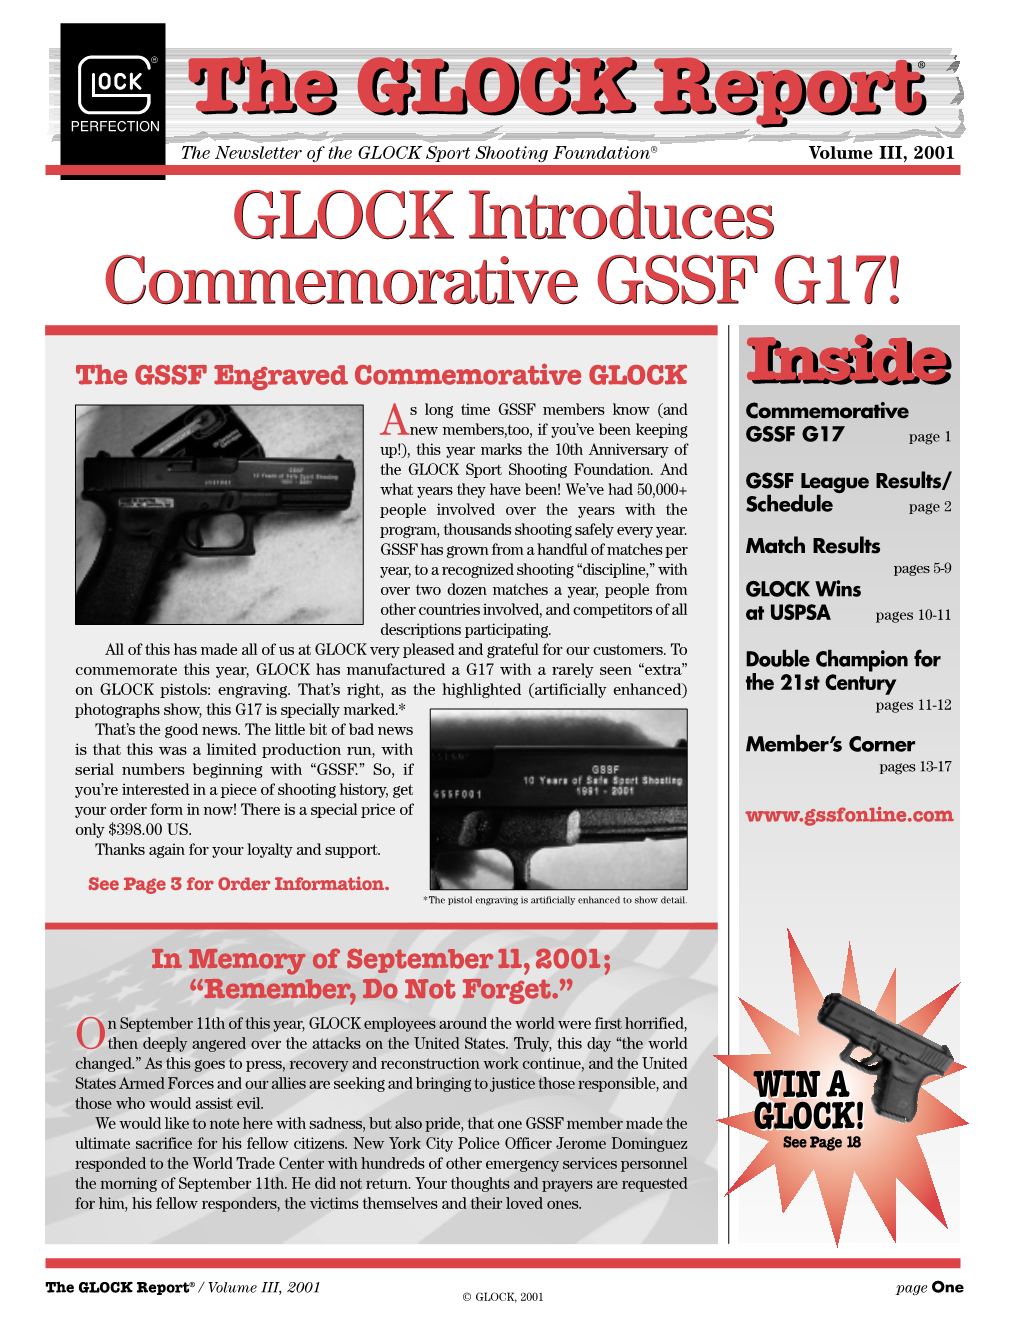 The GLOCK Report® / Volume III, 2001 Page One © GLOCK, 2001 3-Match3-Match Seriesseries Resultsresults